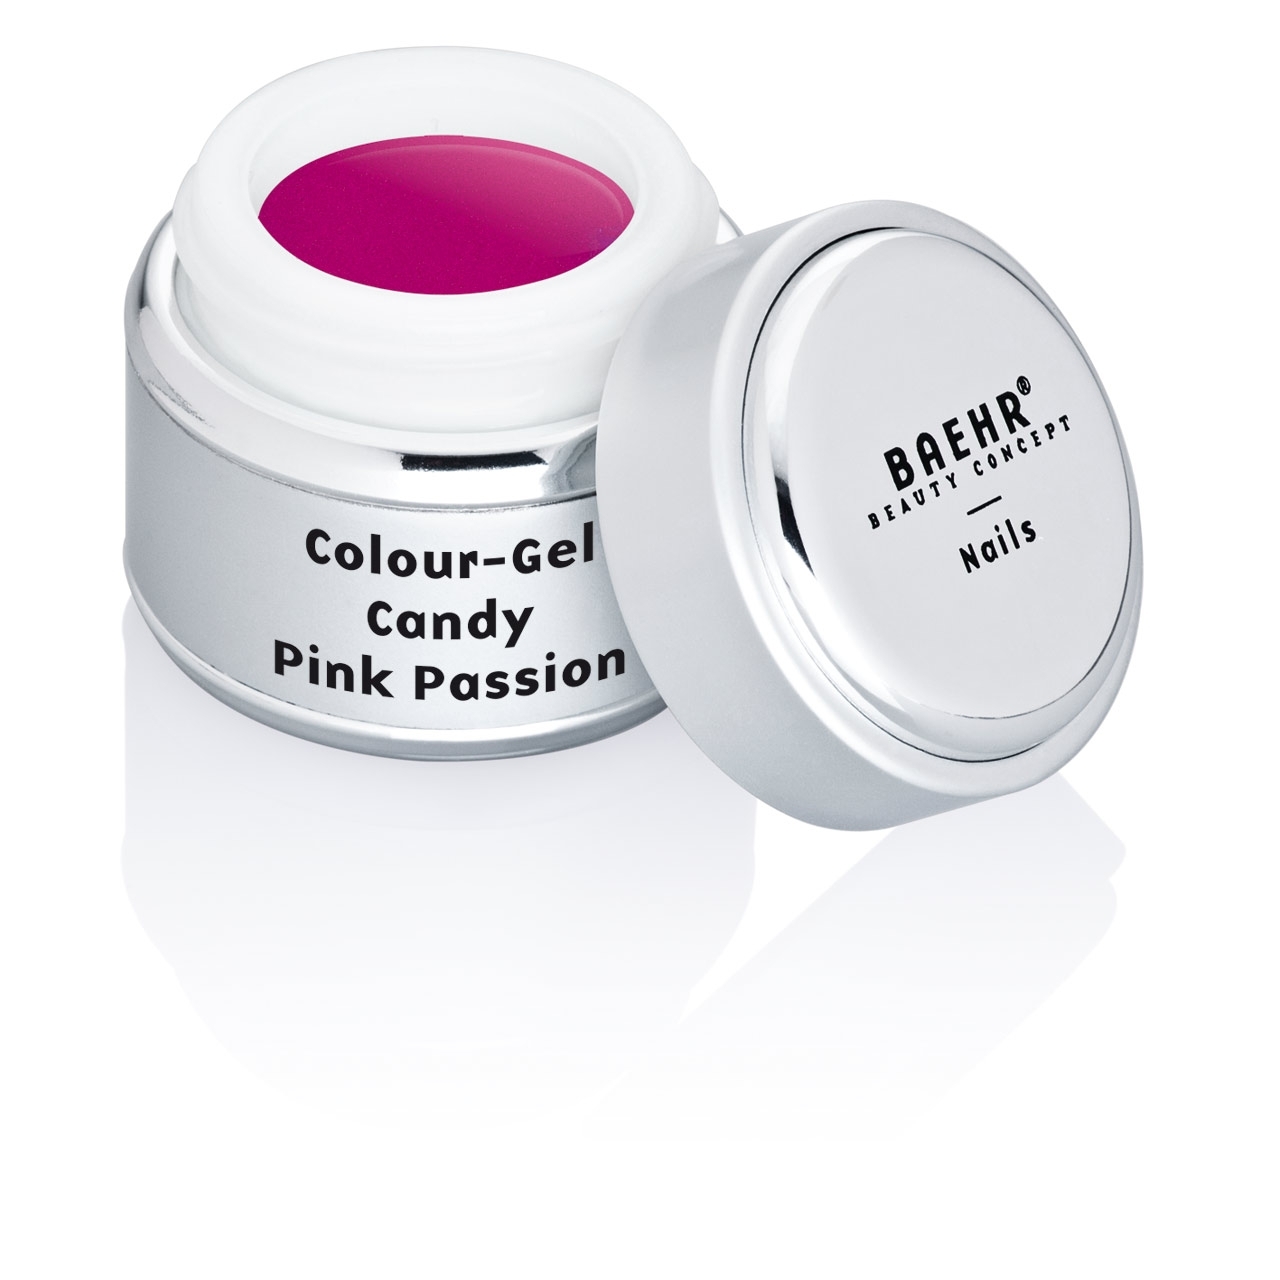 BAEHR BEAUTY CONCEPT - NAILS Colour-Gel Candy Pink Passion 5 ml